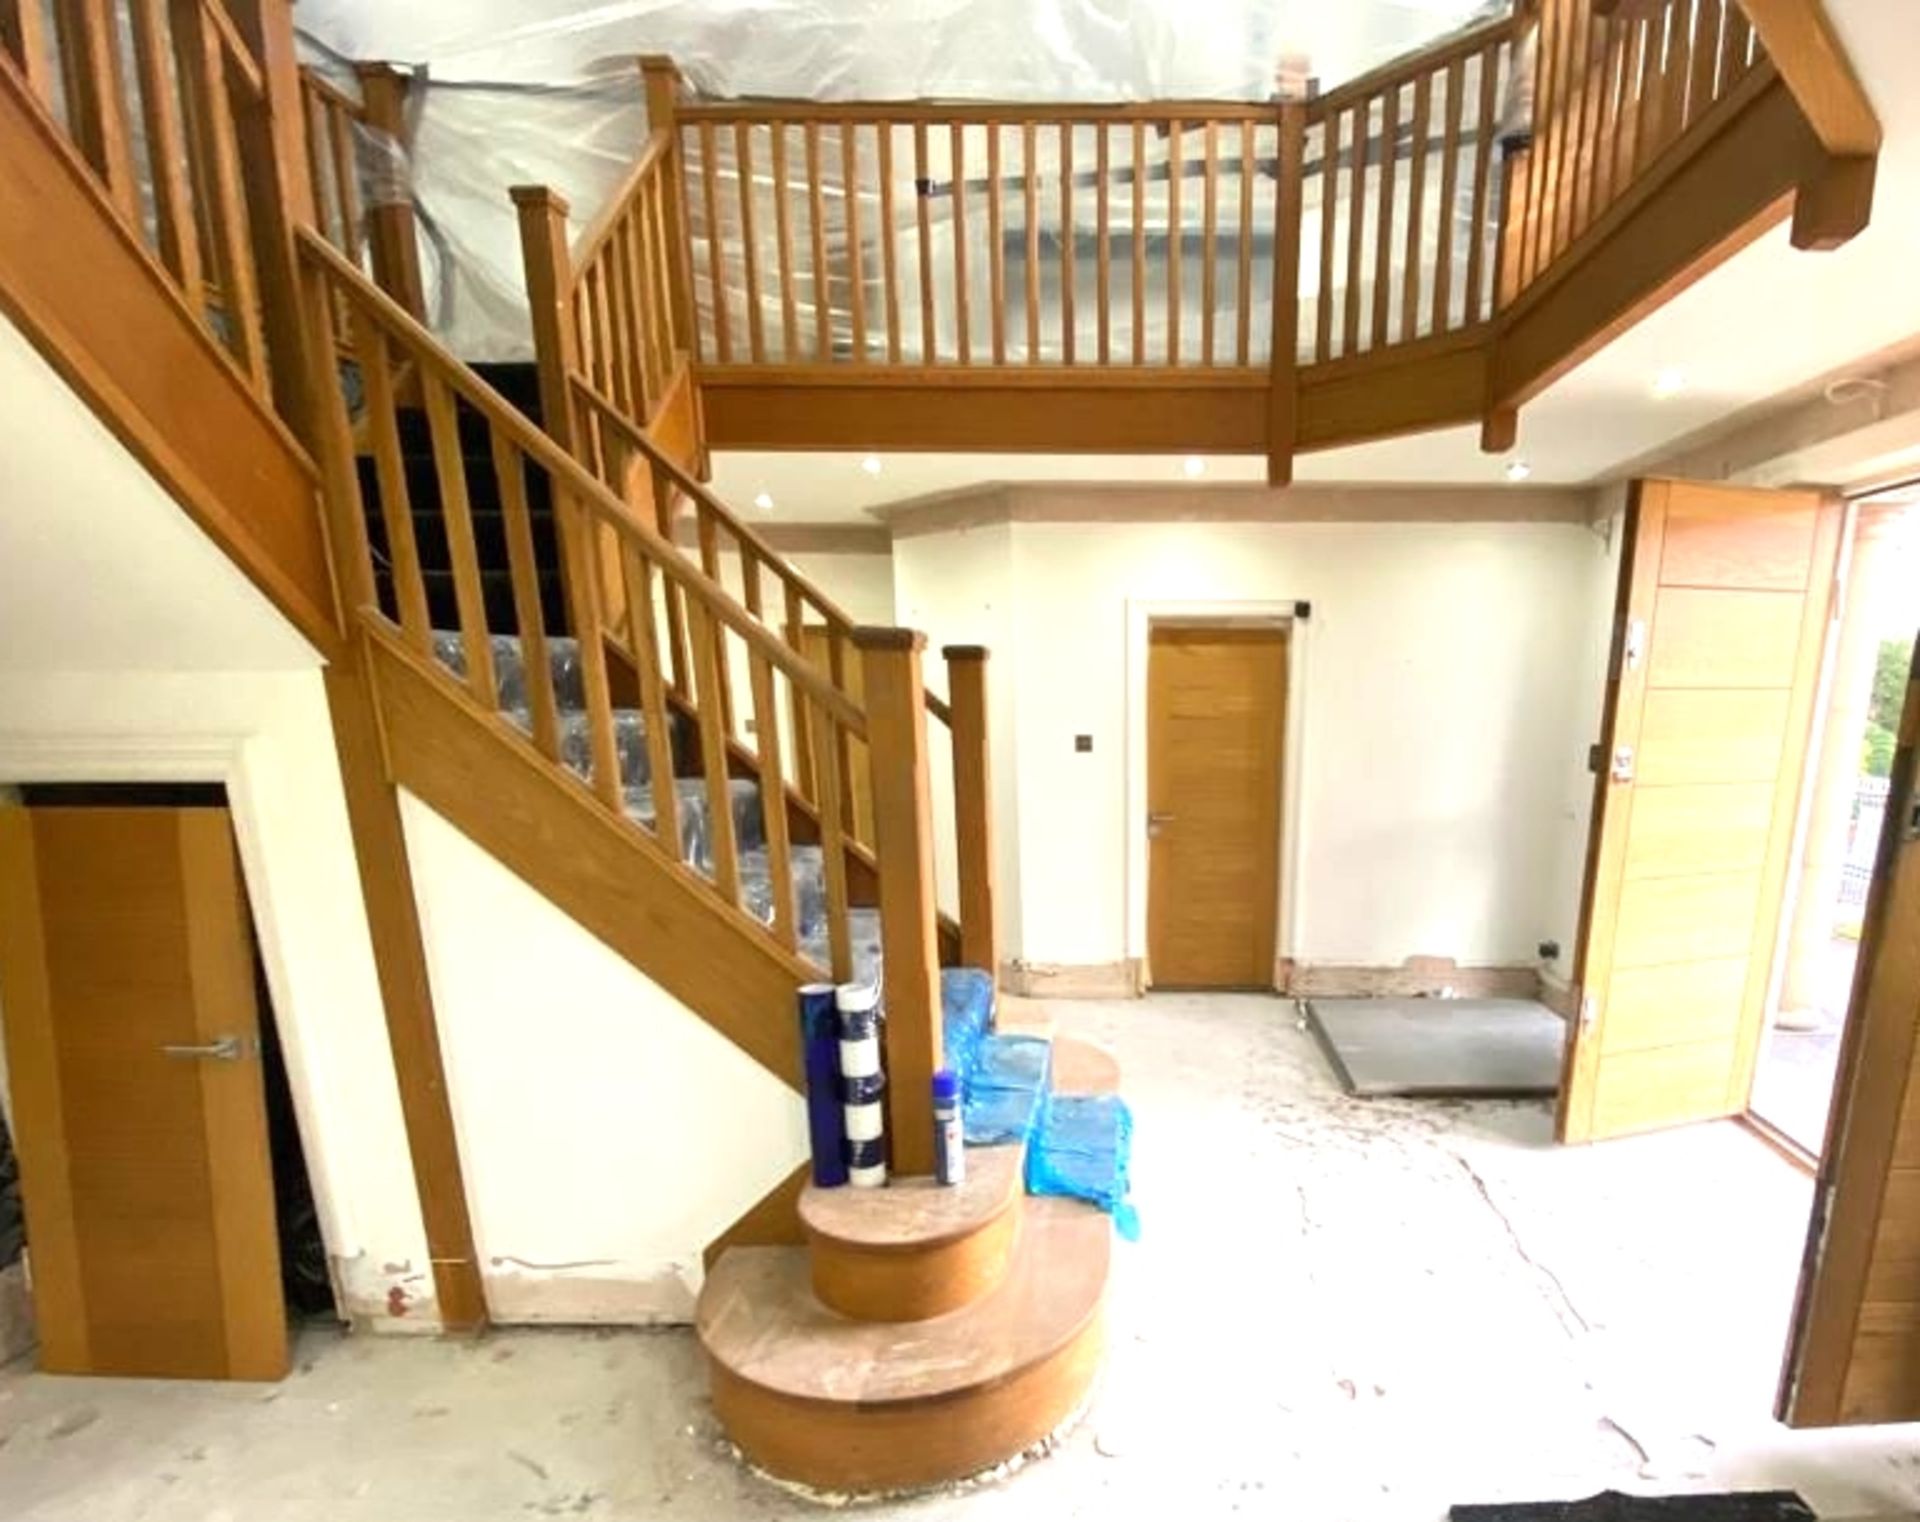 Solid Oak Staircase and Landing Accessories Including Spindles, Posts and Handrails - Approx 140 - Image 2 of 5